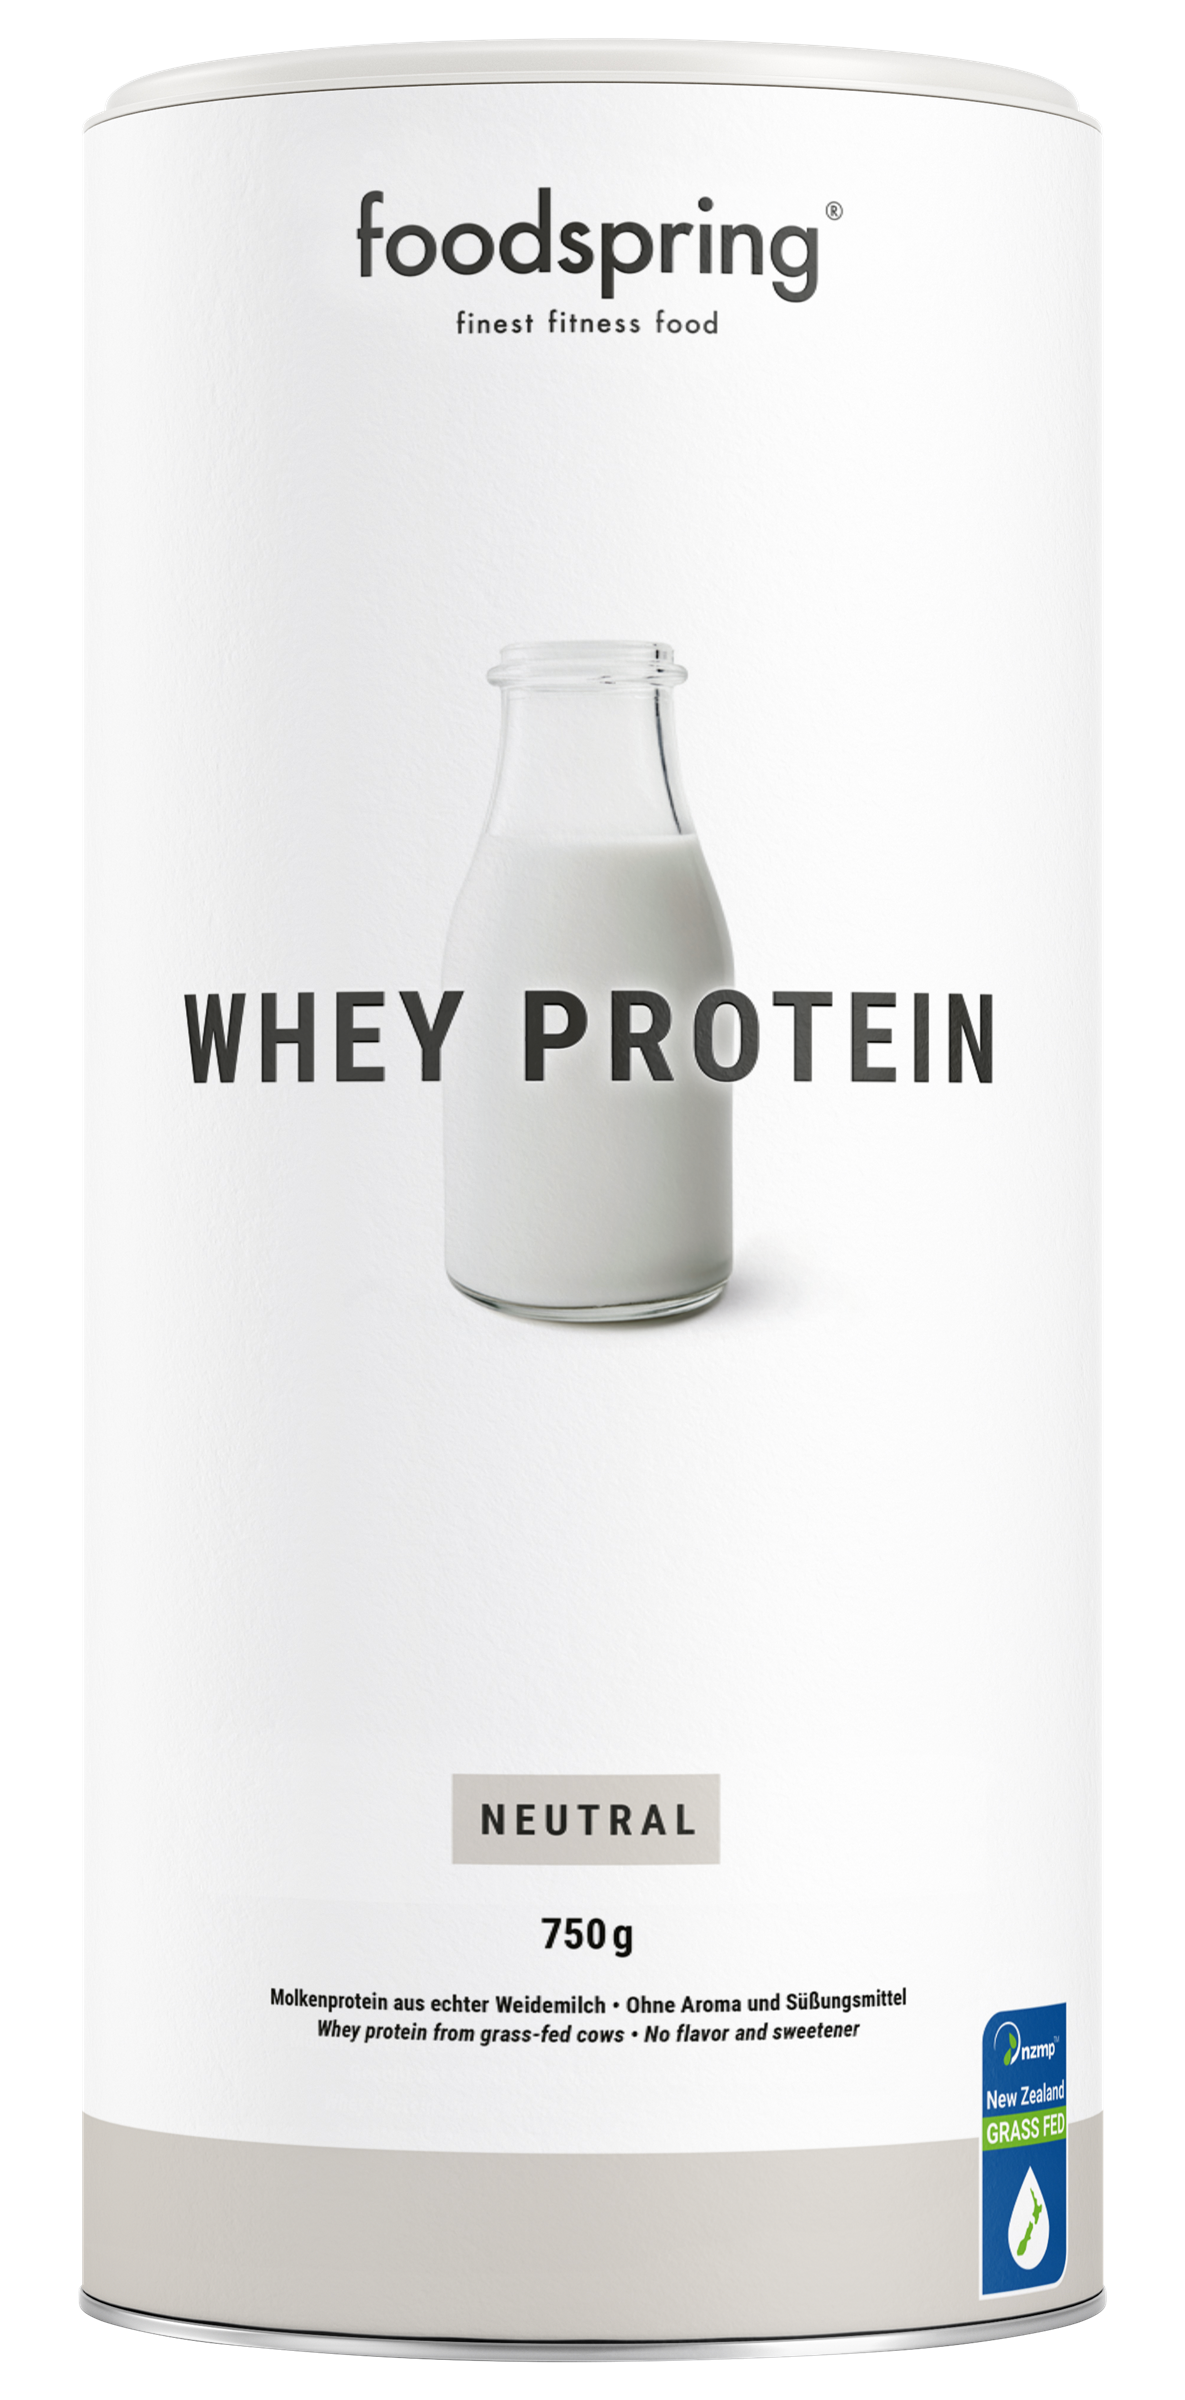 foodspring_Whey Protein_Neutral_EUR 32,99